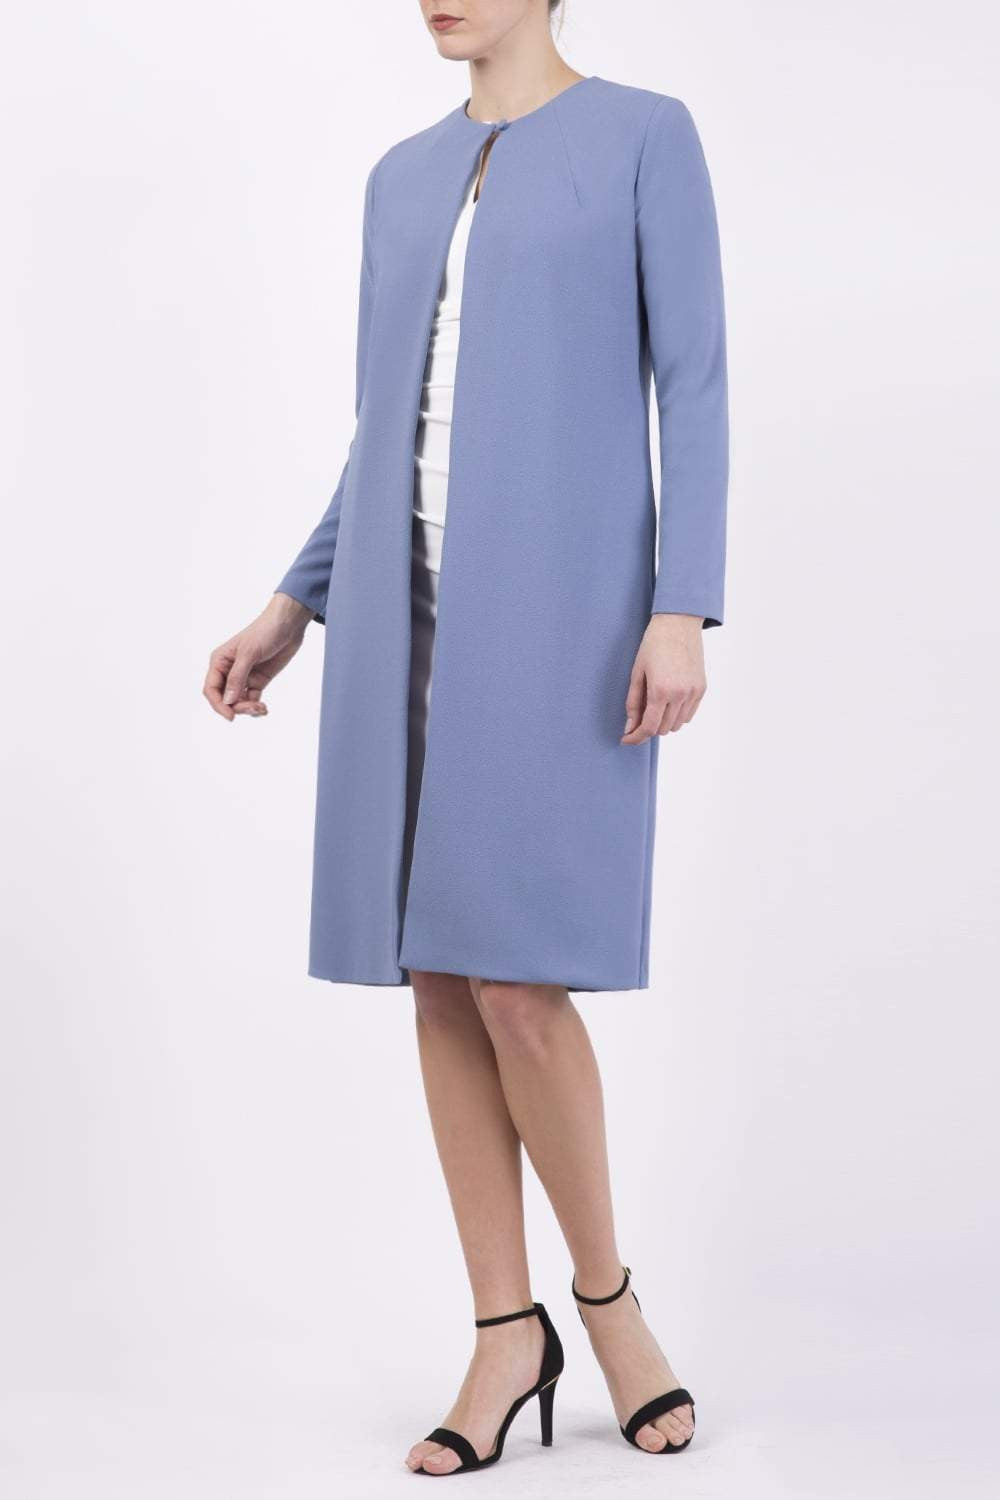 Model wearing the Diva Bliss Coat with round neckline in Stone Blue front image